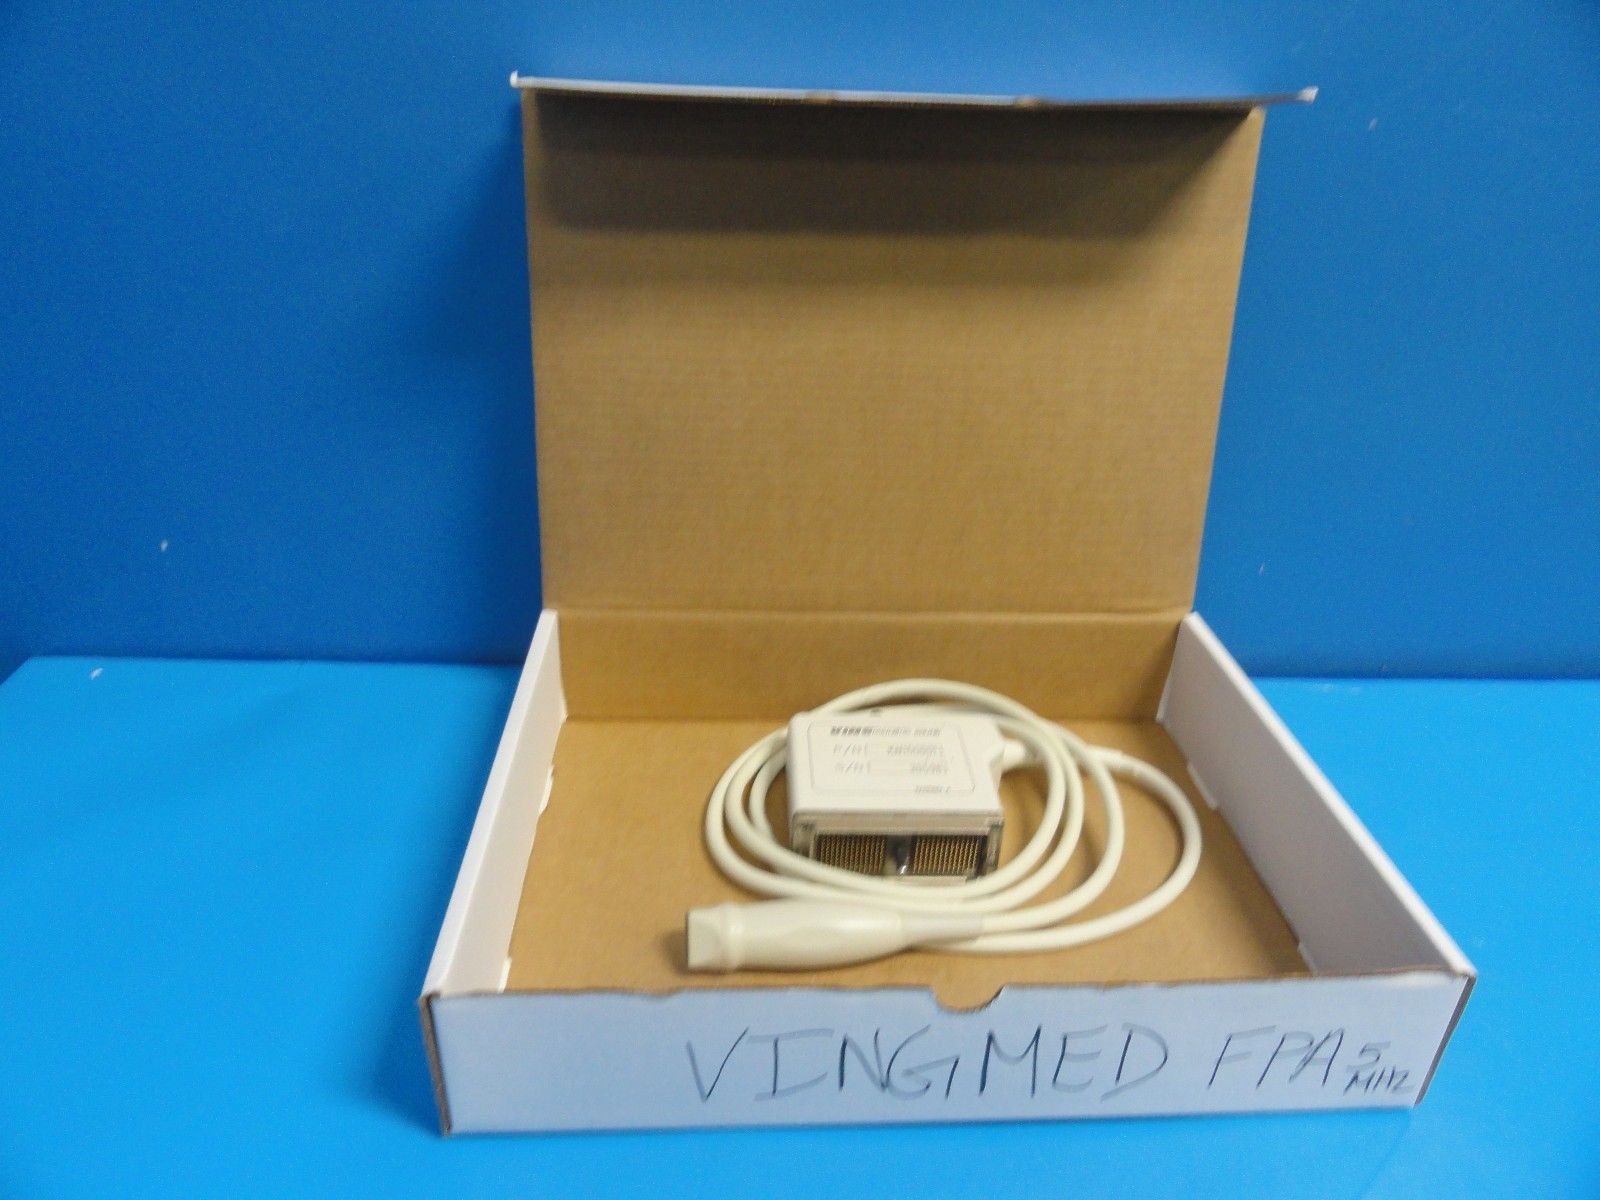 GE Vingmed KN100001 FPA 5MHZ 1A Flat Phased Array Probe for GE System 5 (10335) DIAGNOSTIC ULTRASOUND MACHINES FOR SALE